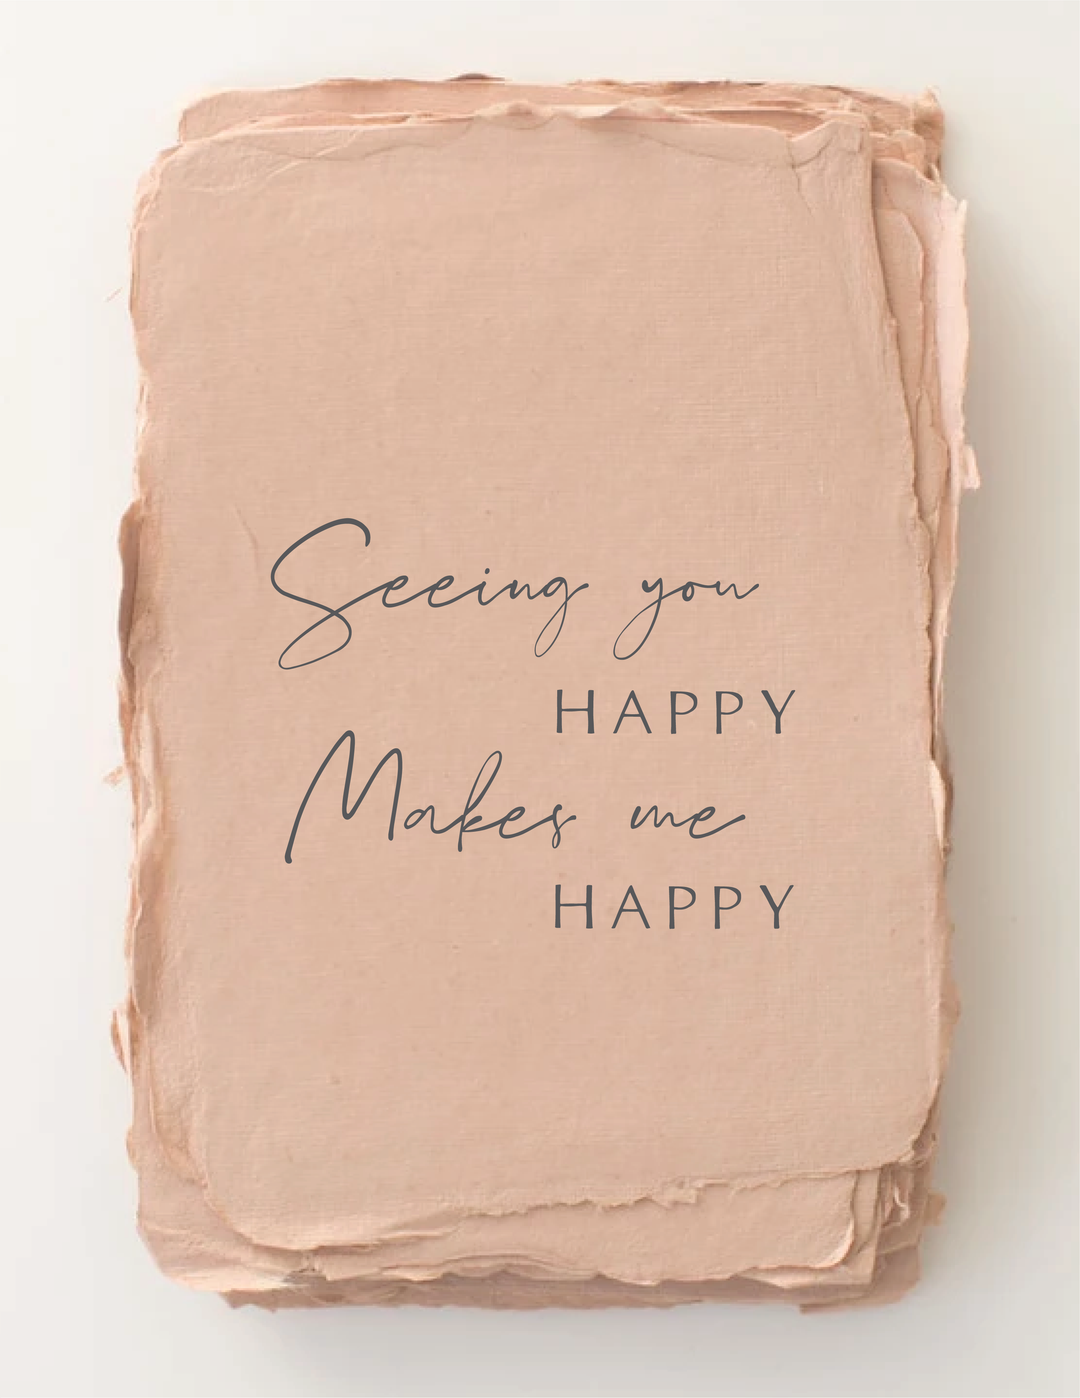 "Seeing you happy makes me happy" Friendship Greeting Card